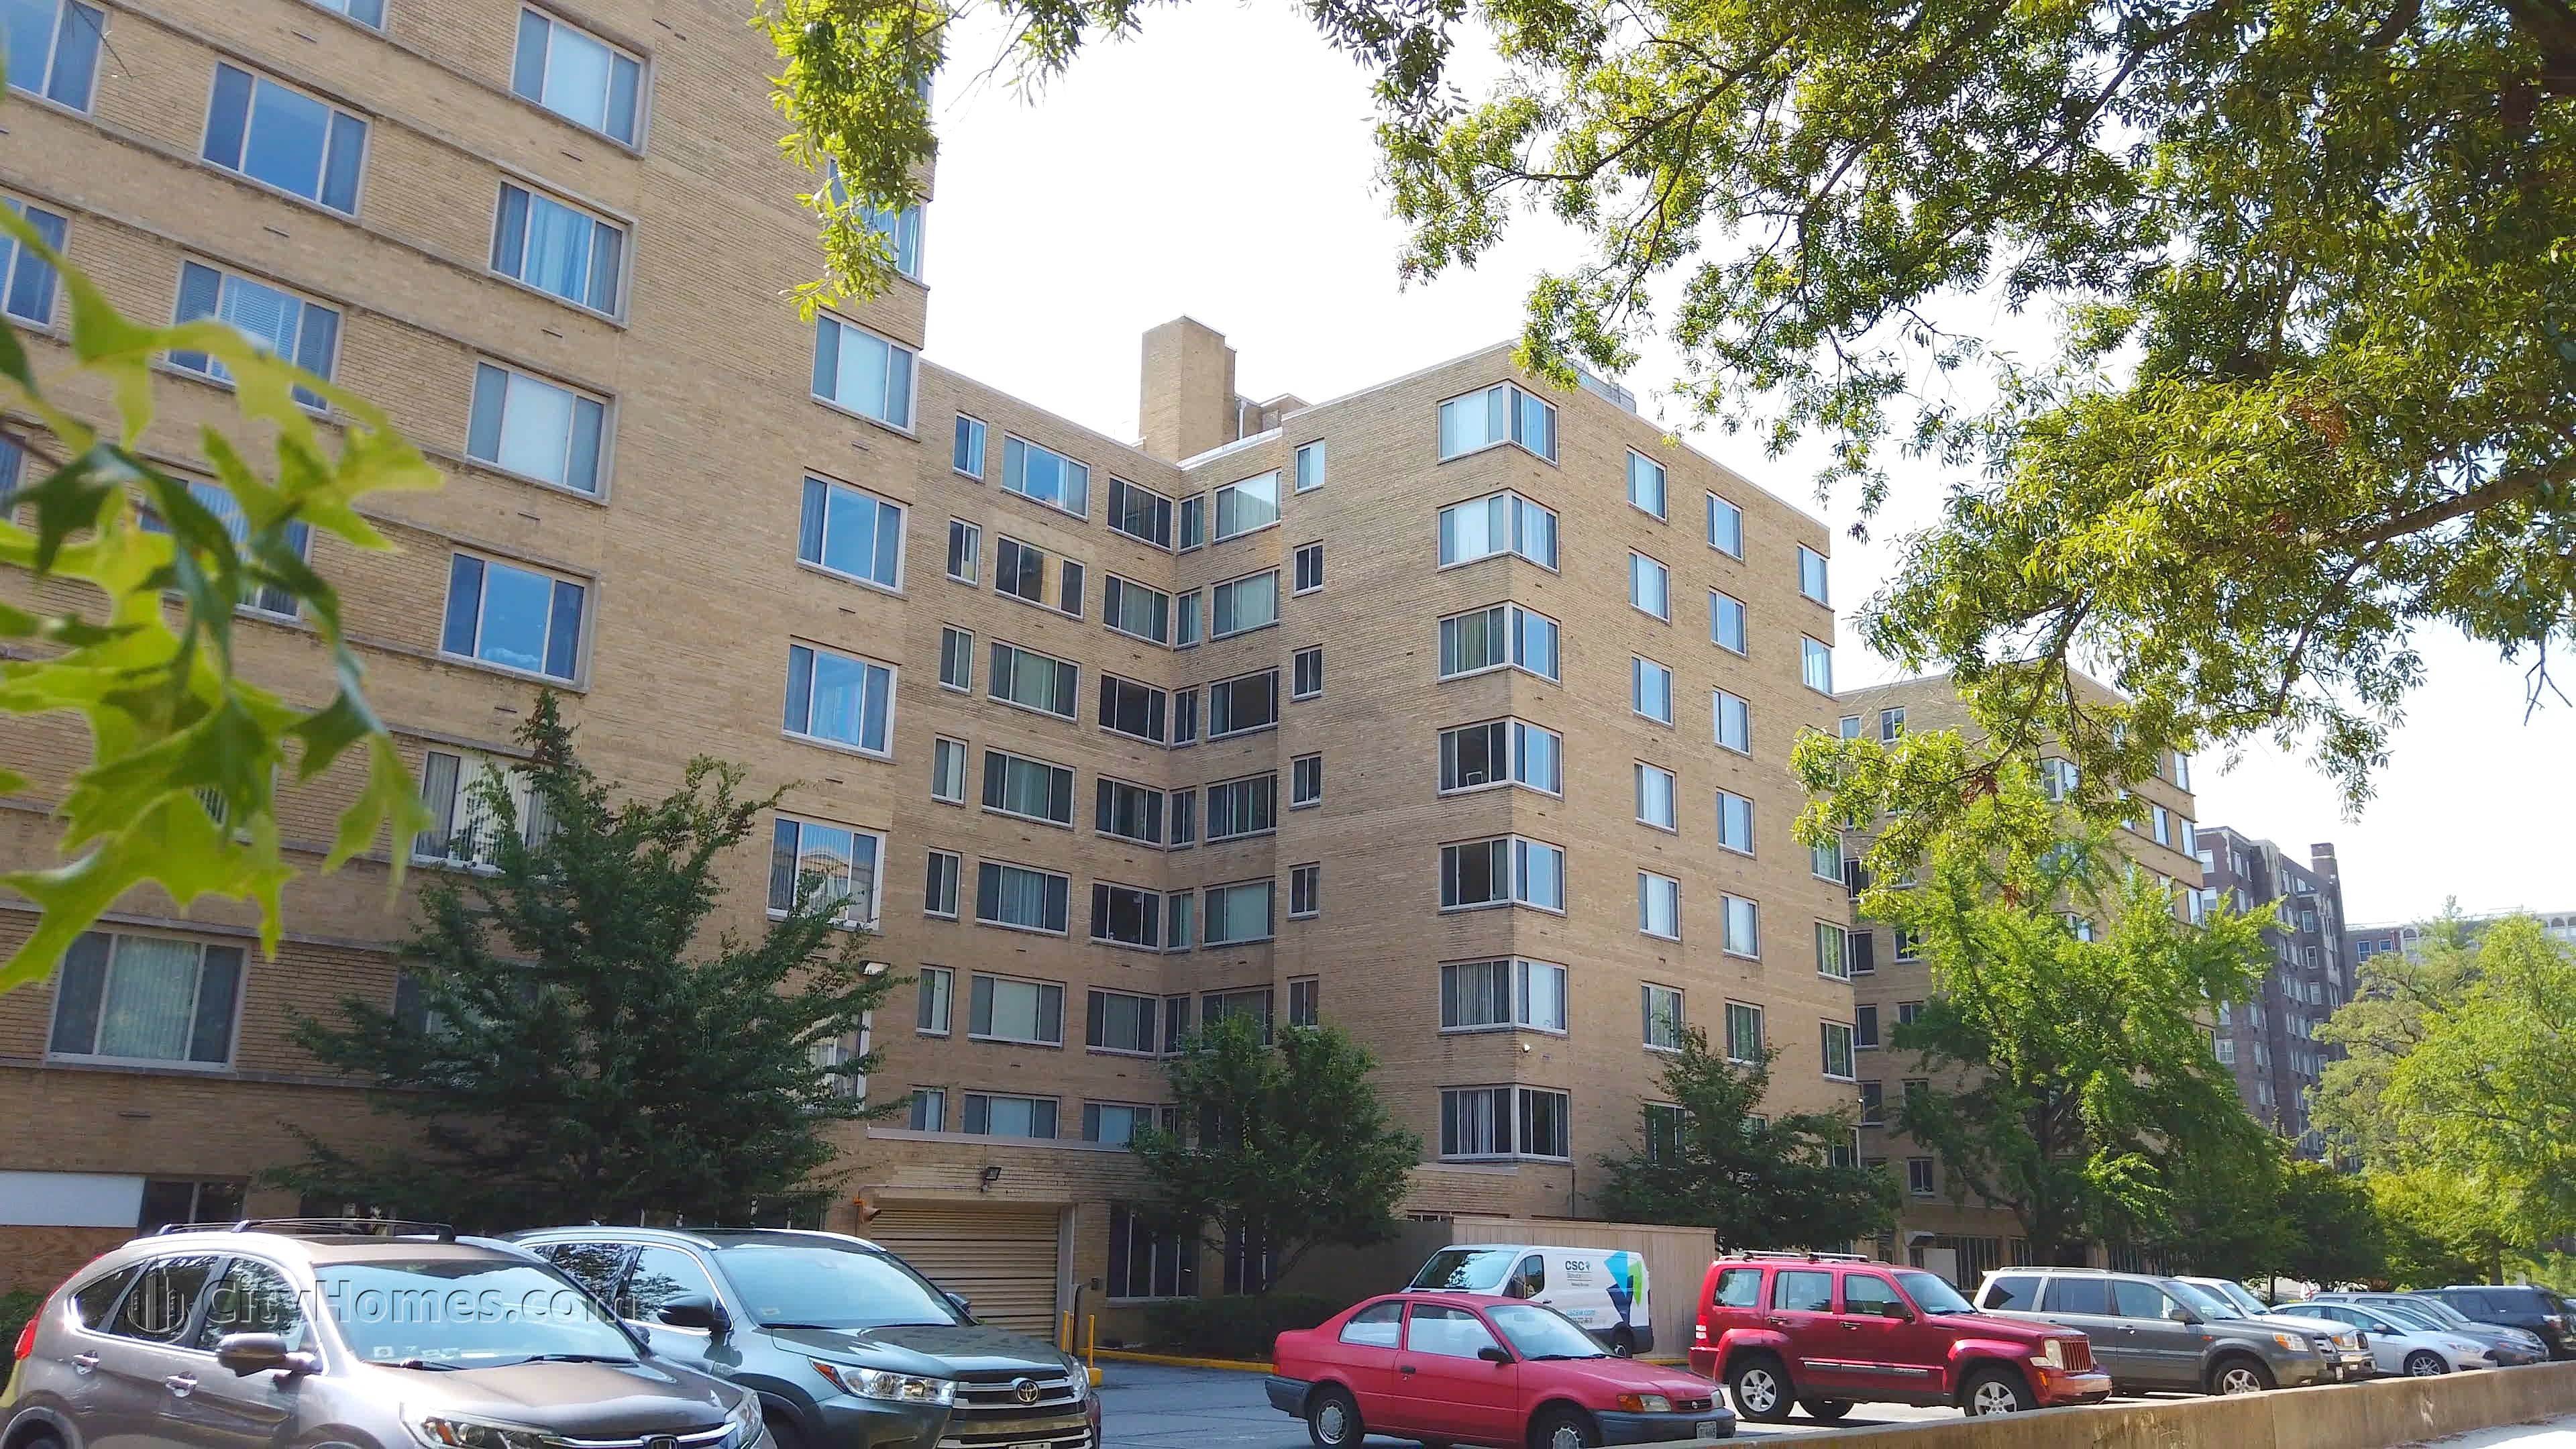 5. Cathedral Cooperative building at 4101 Cathedral Ave NW, Observatory Circle, Washington, DC 20016